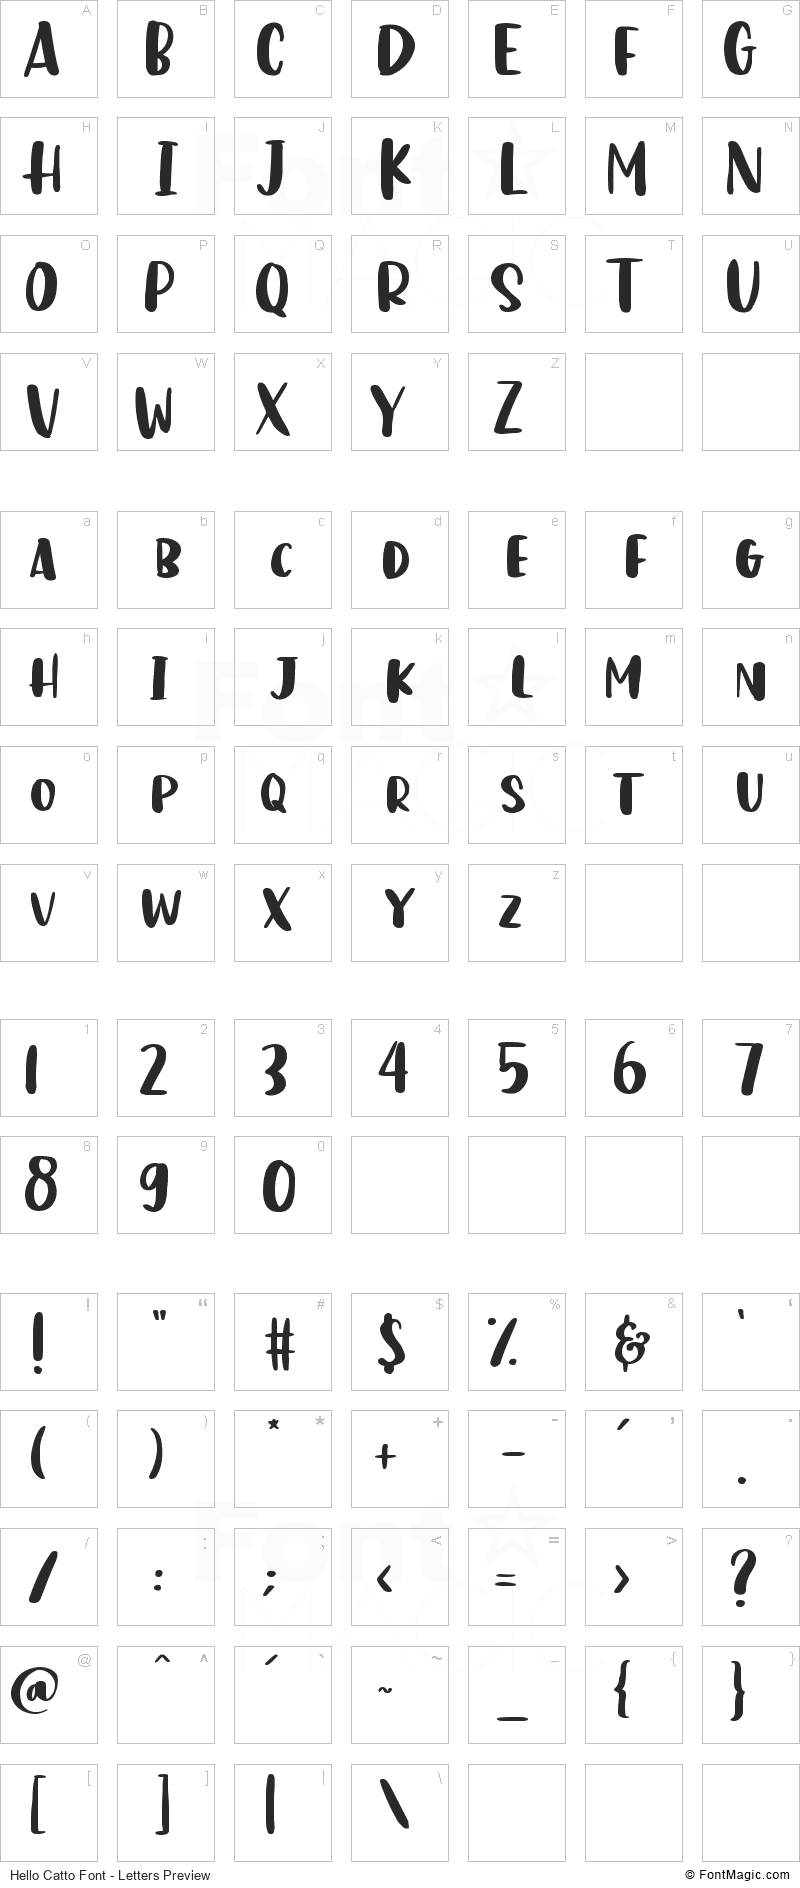 Hello Catto Font - All Latters Preview Chart